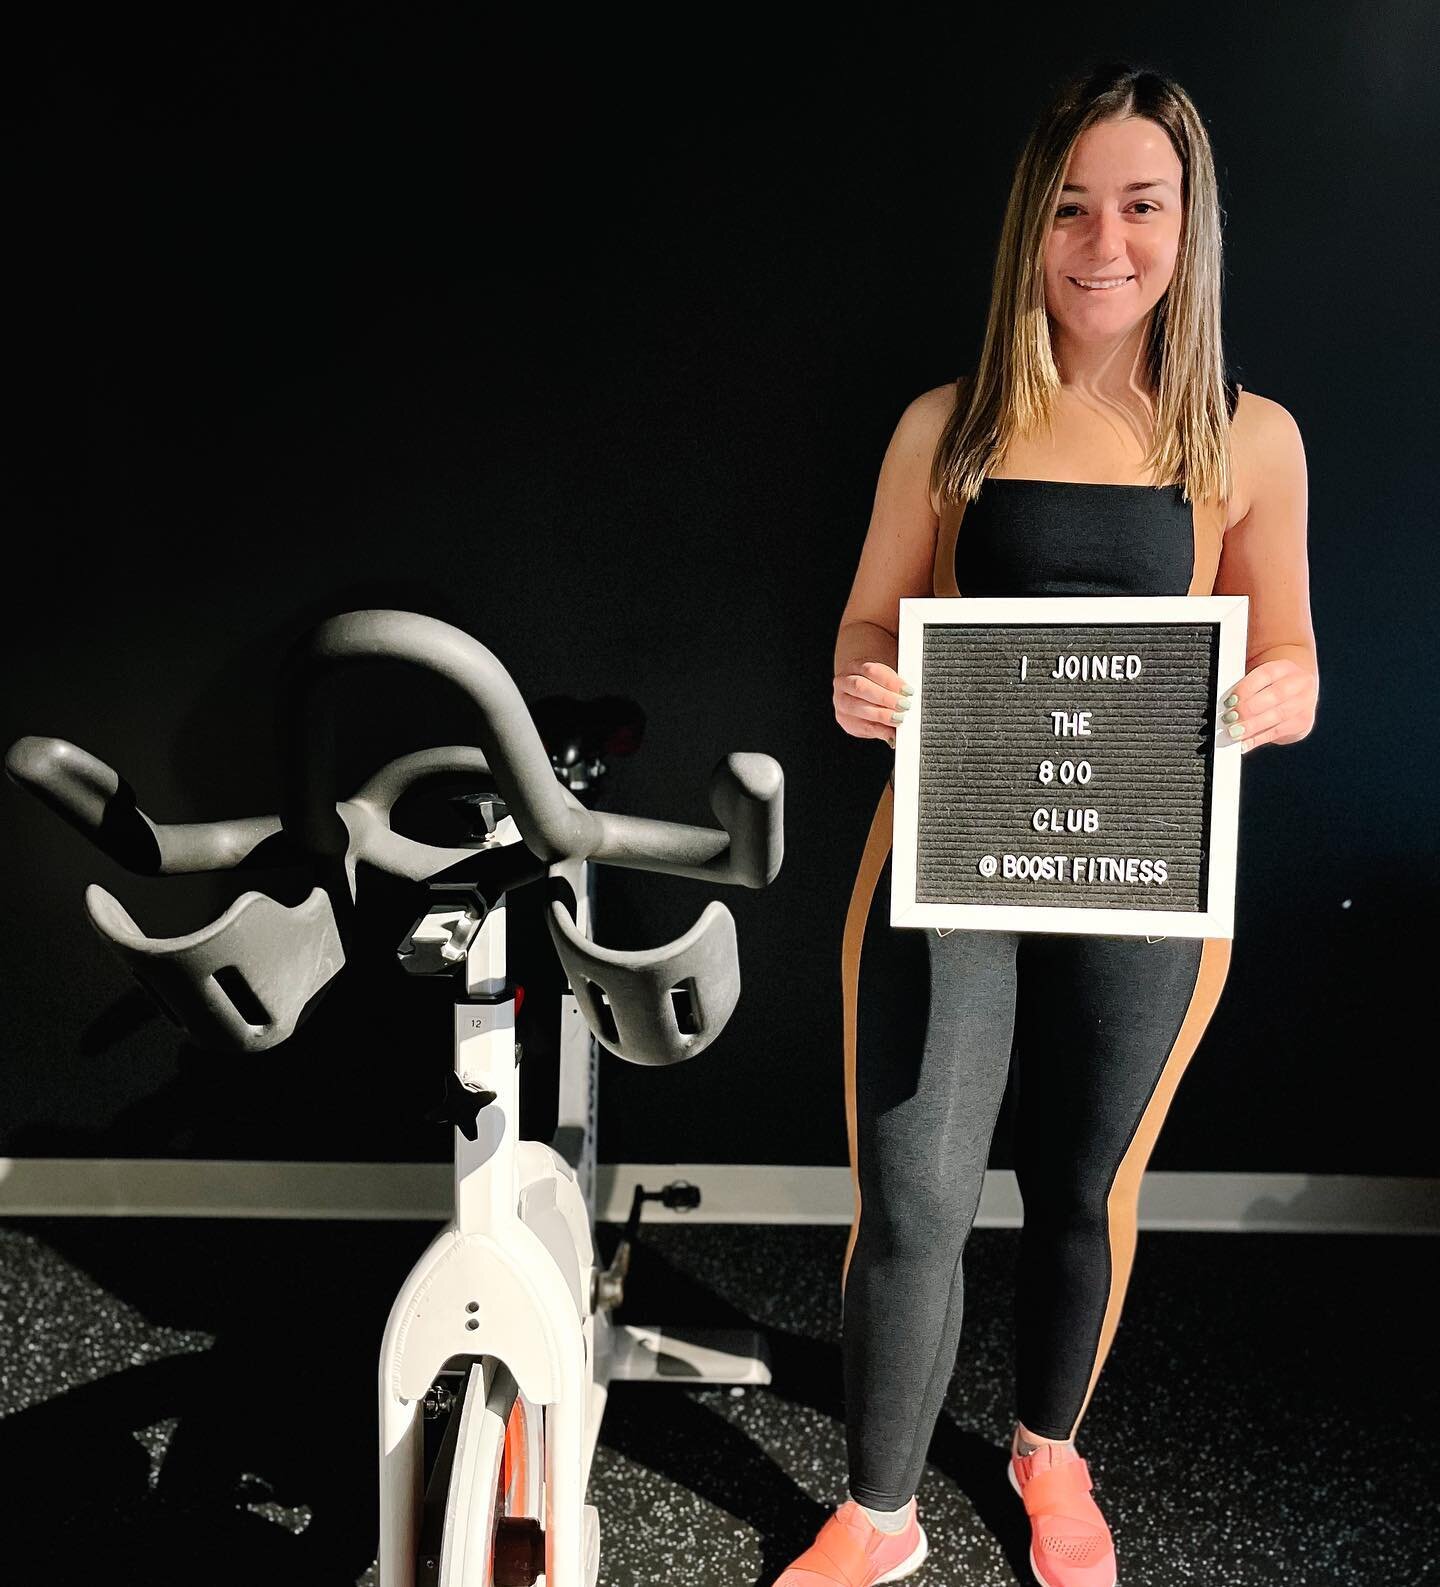 🌟 MILESTONE ACHIEVEMENTS 🌟

Kicking off April with some amazing milestones that deserve such recognition! Between cycle, yoga or strength classes, our clients are pushing themselves to even higher limits and reaching these milestones even FASTER!

